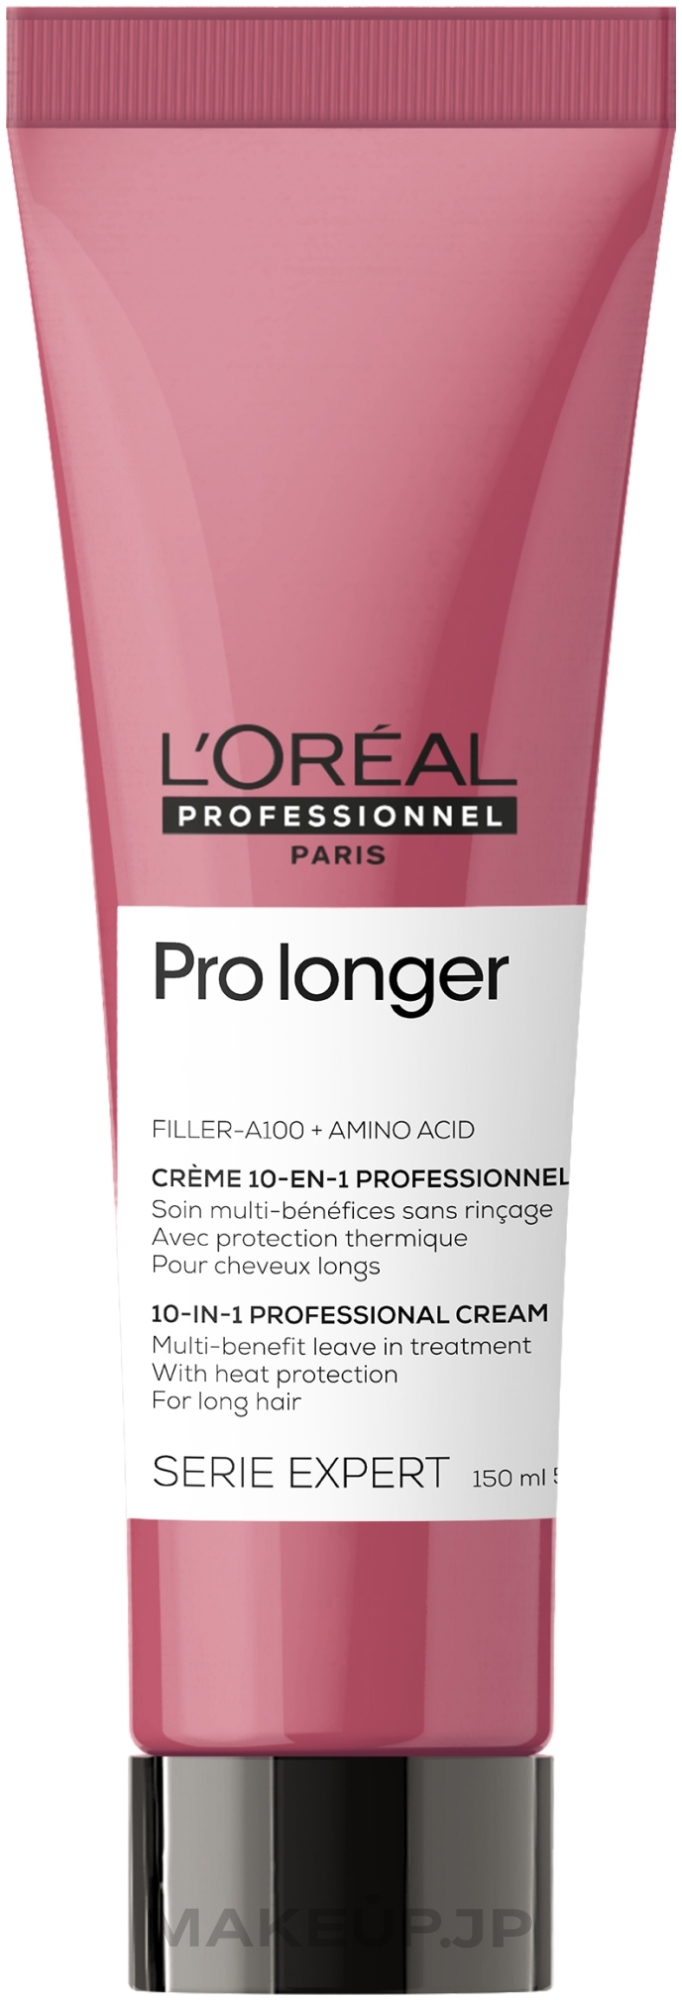 Heat Protection Hair Cream for Length & Ends - L'Oreal Professionnel Pro Longer Renewing Cream — photo 150 ml NEW